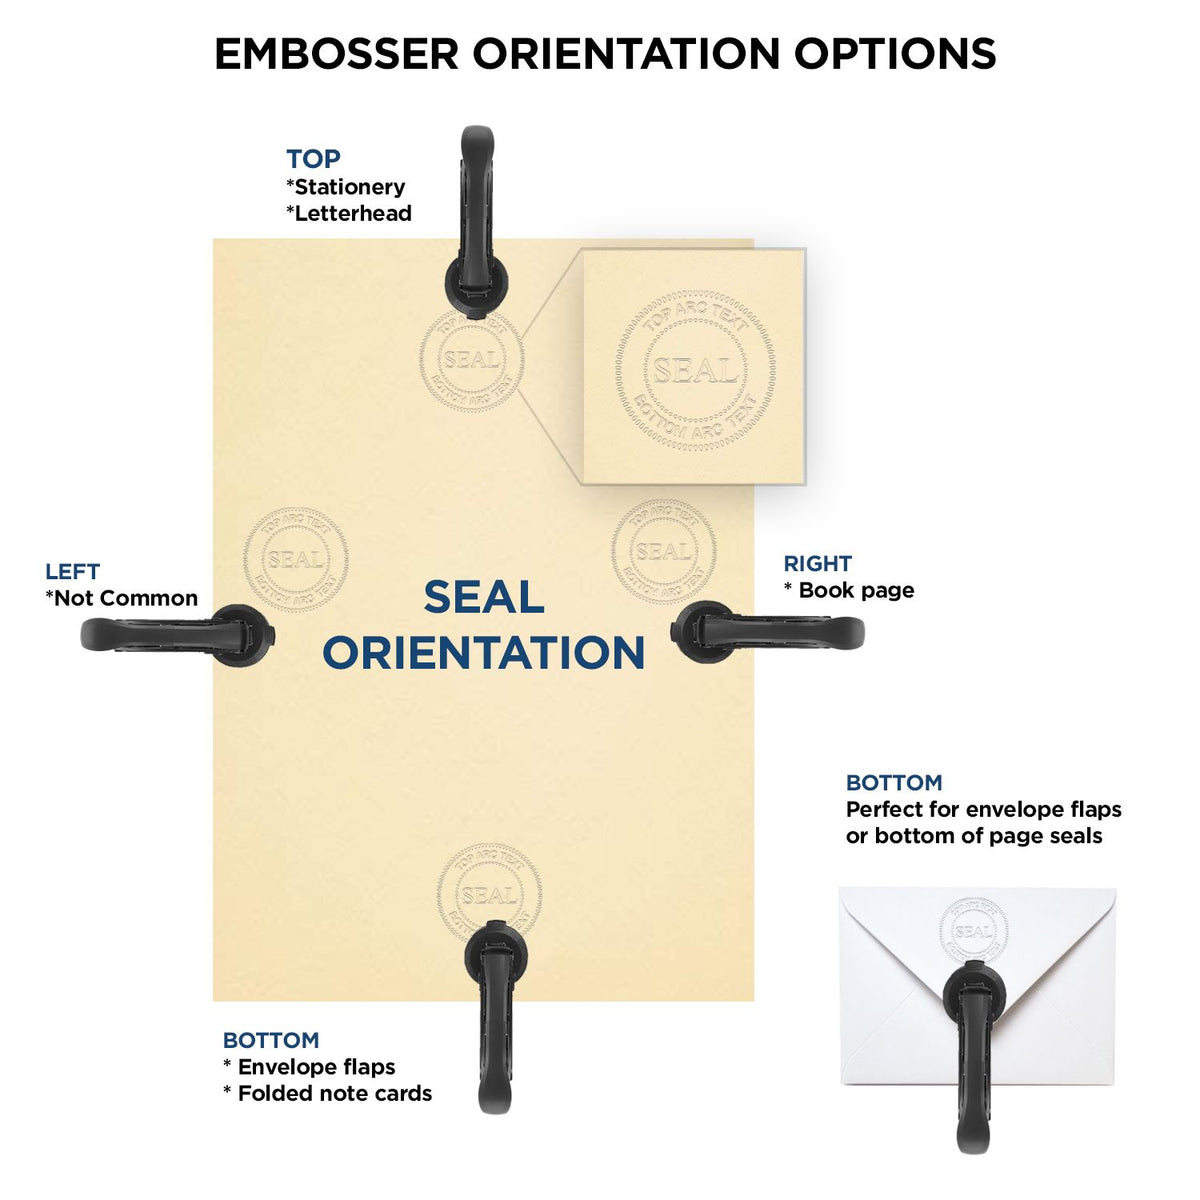 An infographic for the Extended Long Reach Delaware Surveyor Embosser showing embosser orientation, this is showing examples of a top, bottom, right and left insert.